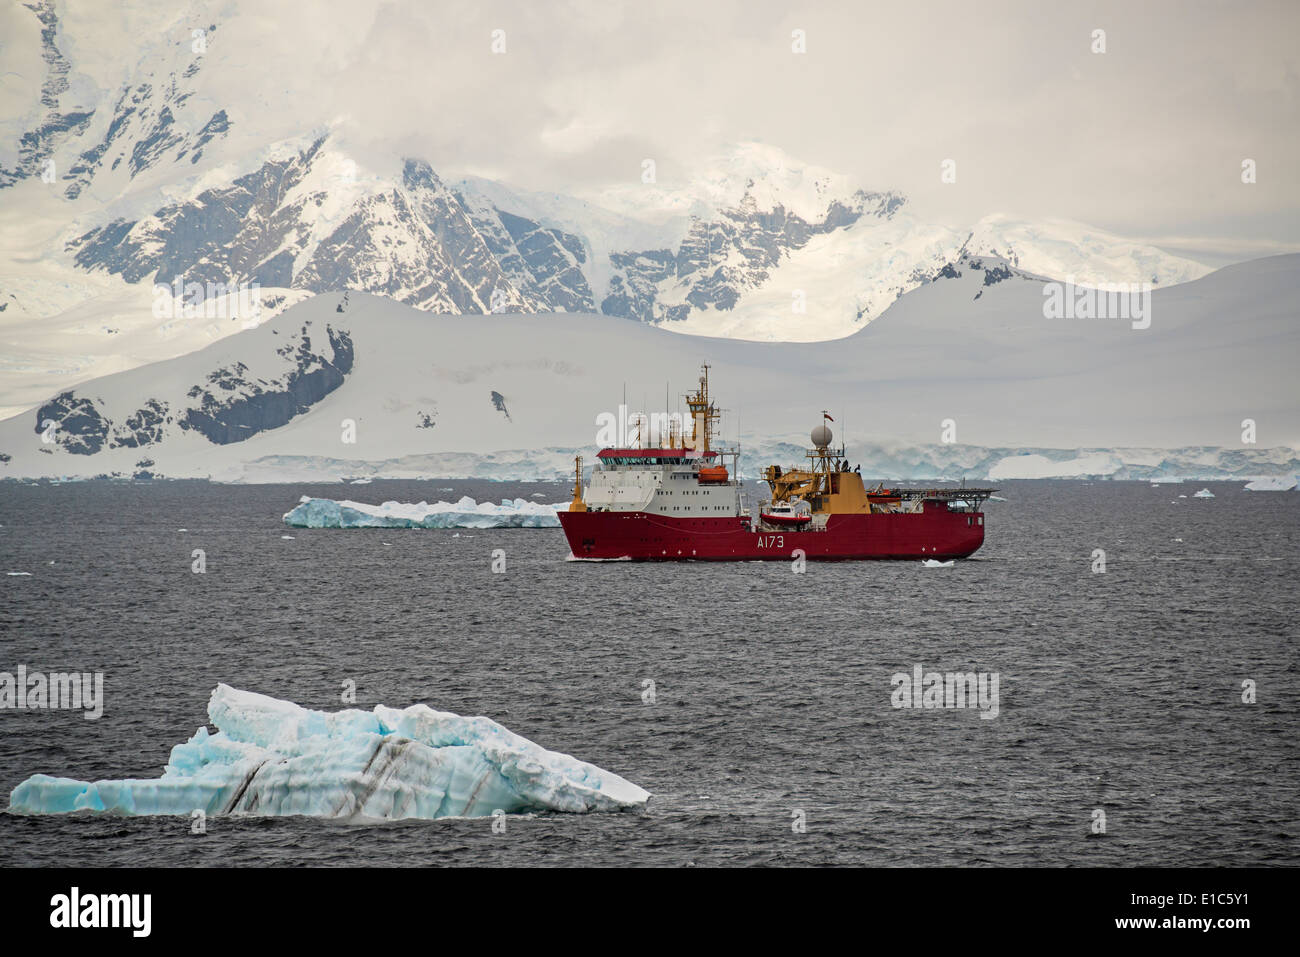 A scientific survey research ship on the water offshore in Antarctica. Stock Photo